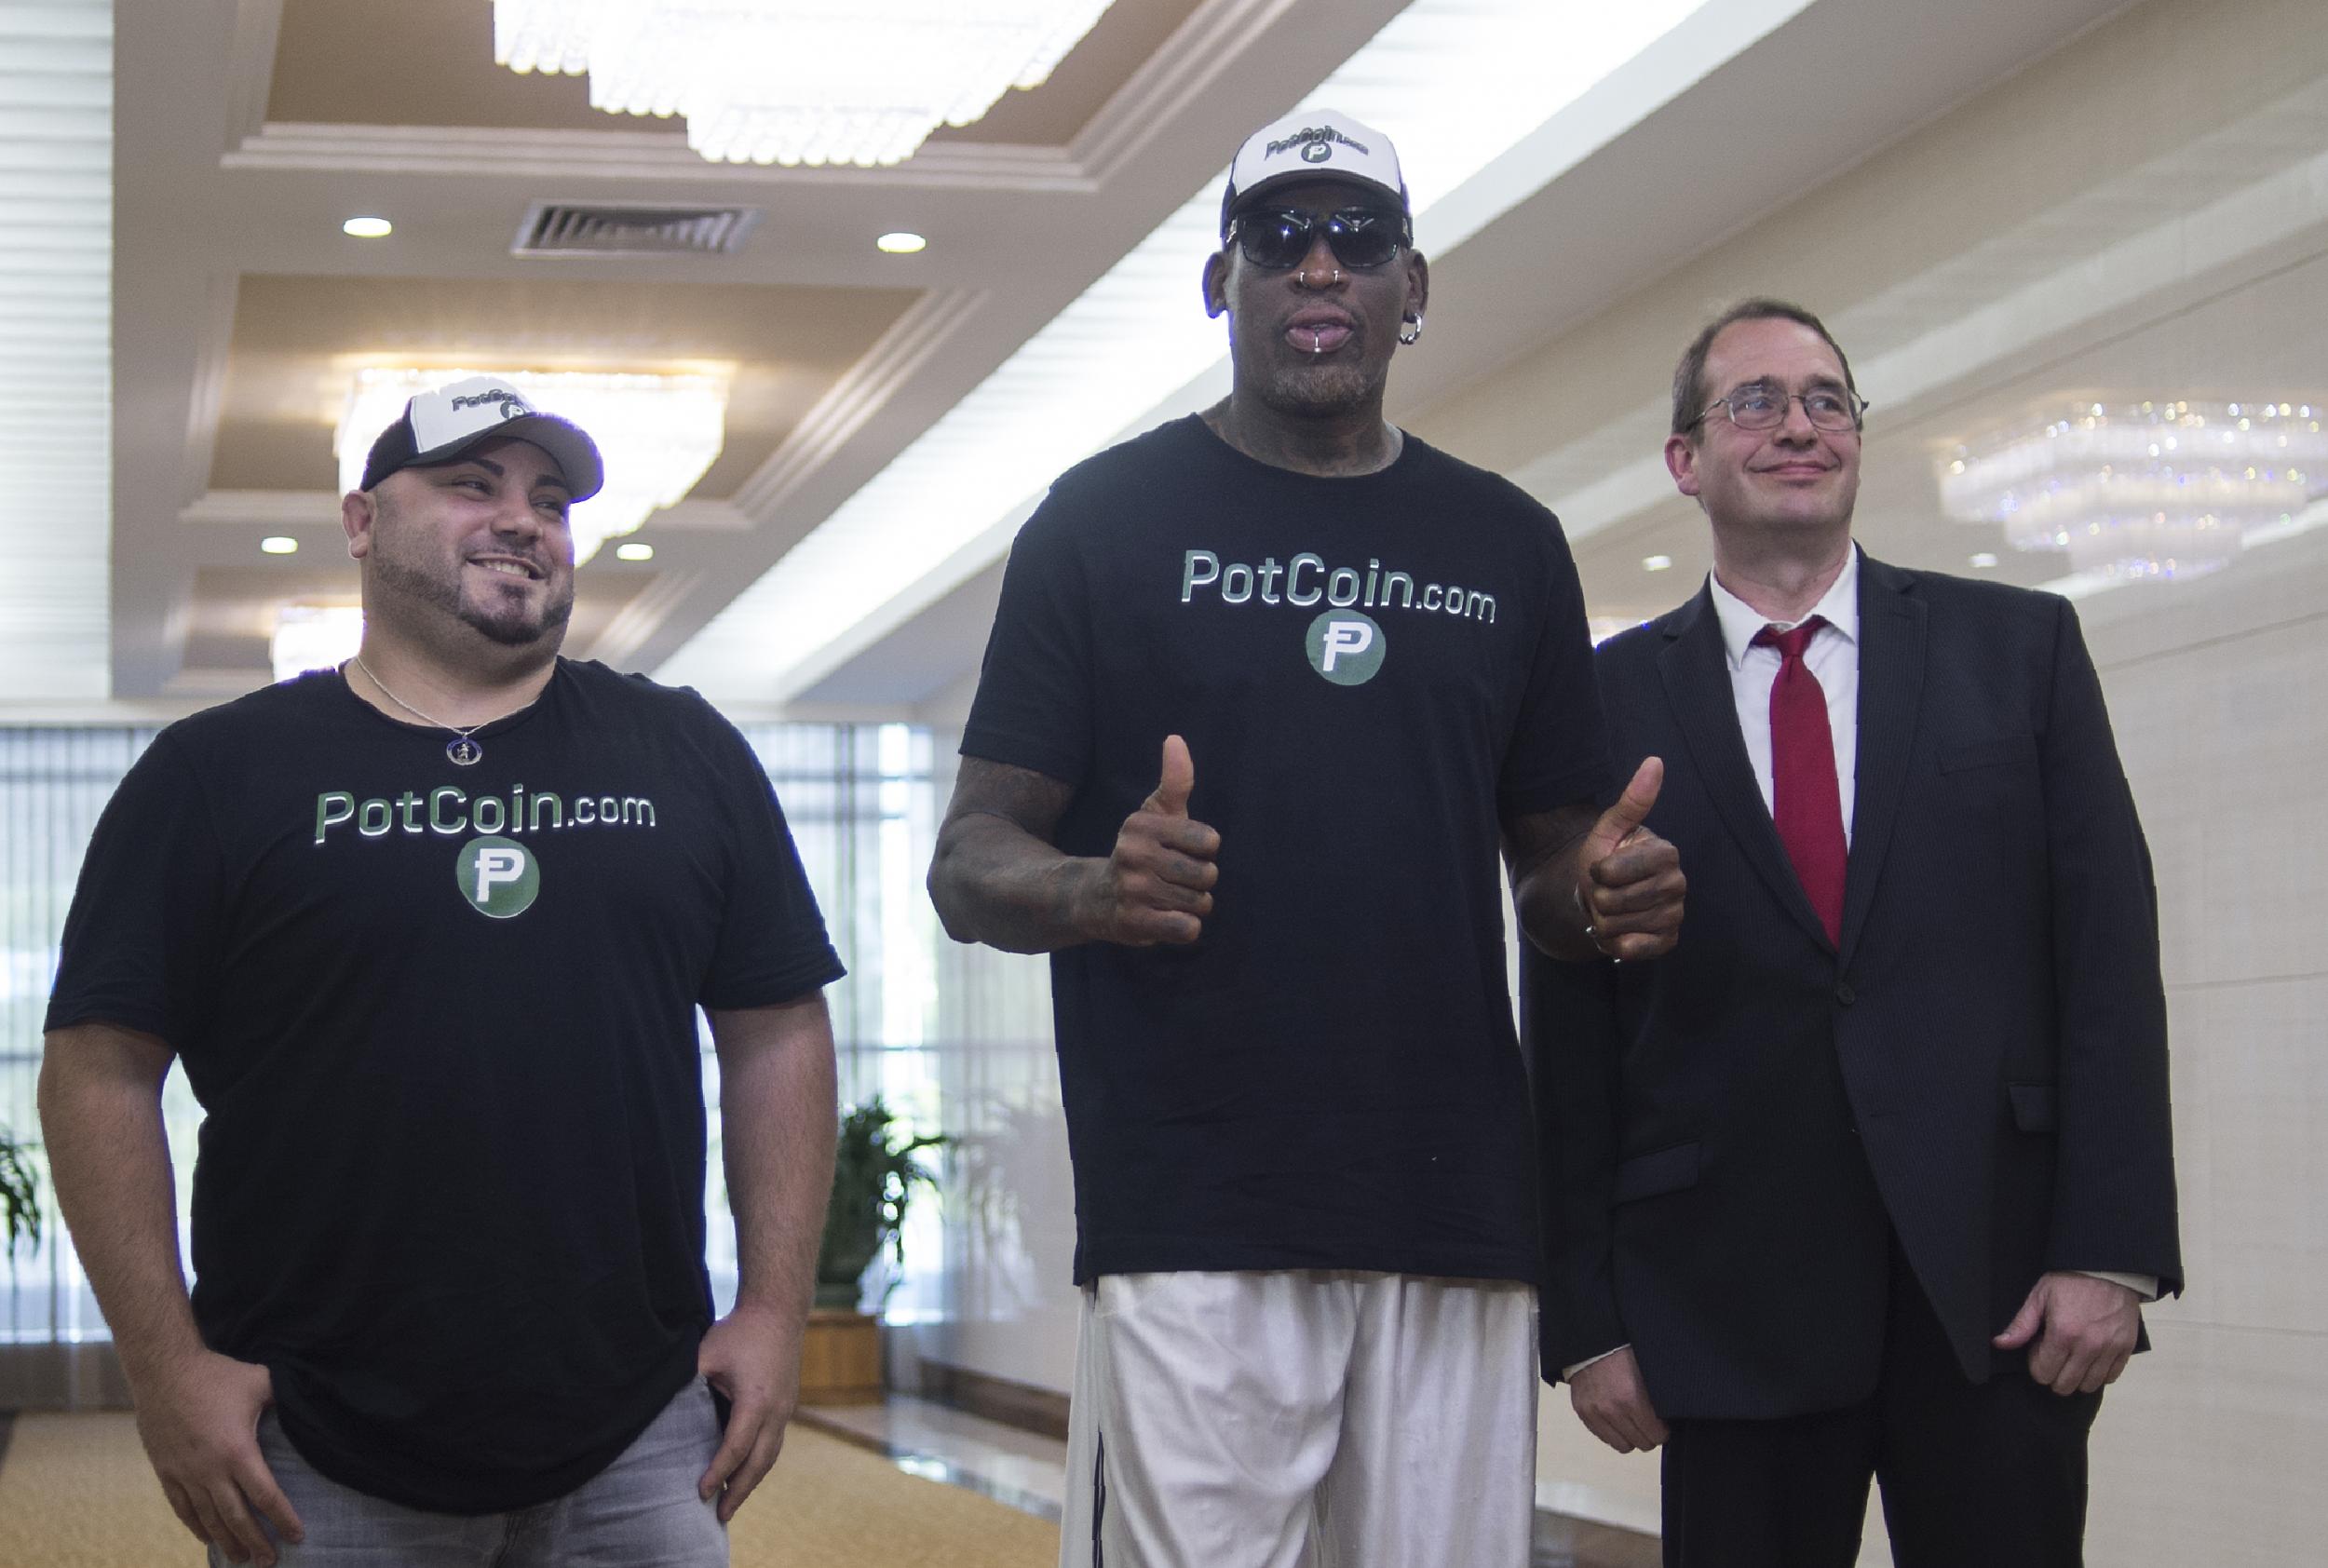 Dennis Rodman (centre) with members of his party following his arrival at Pyongyang International Airport on Tuesday